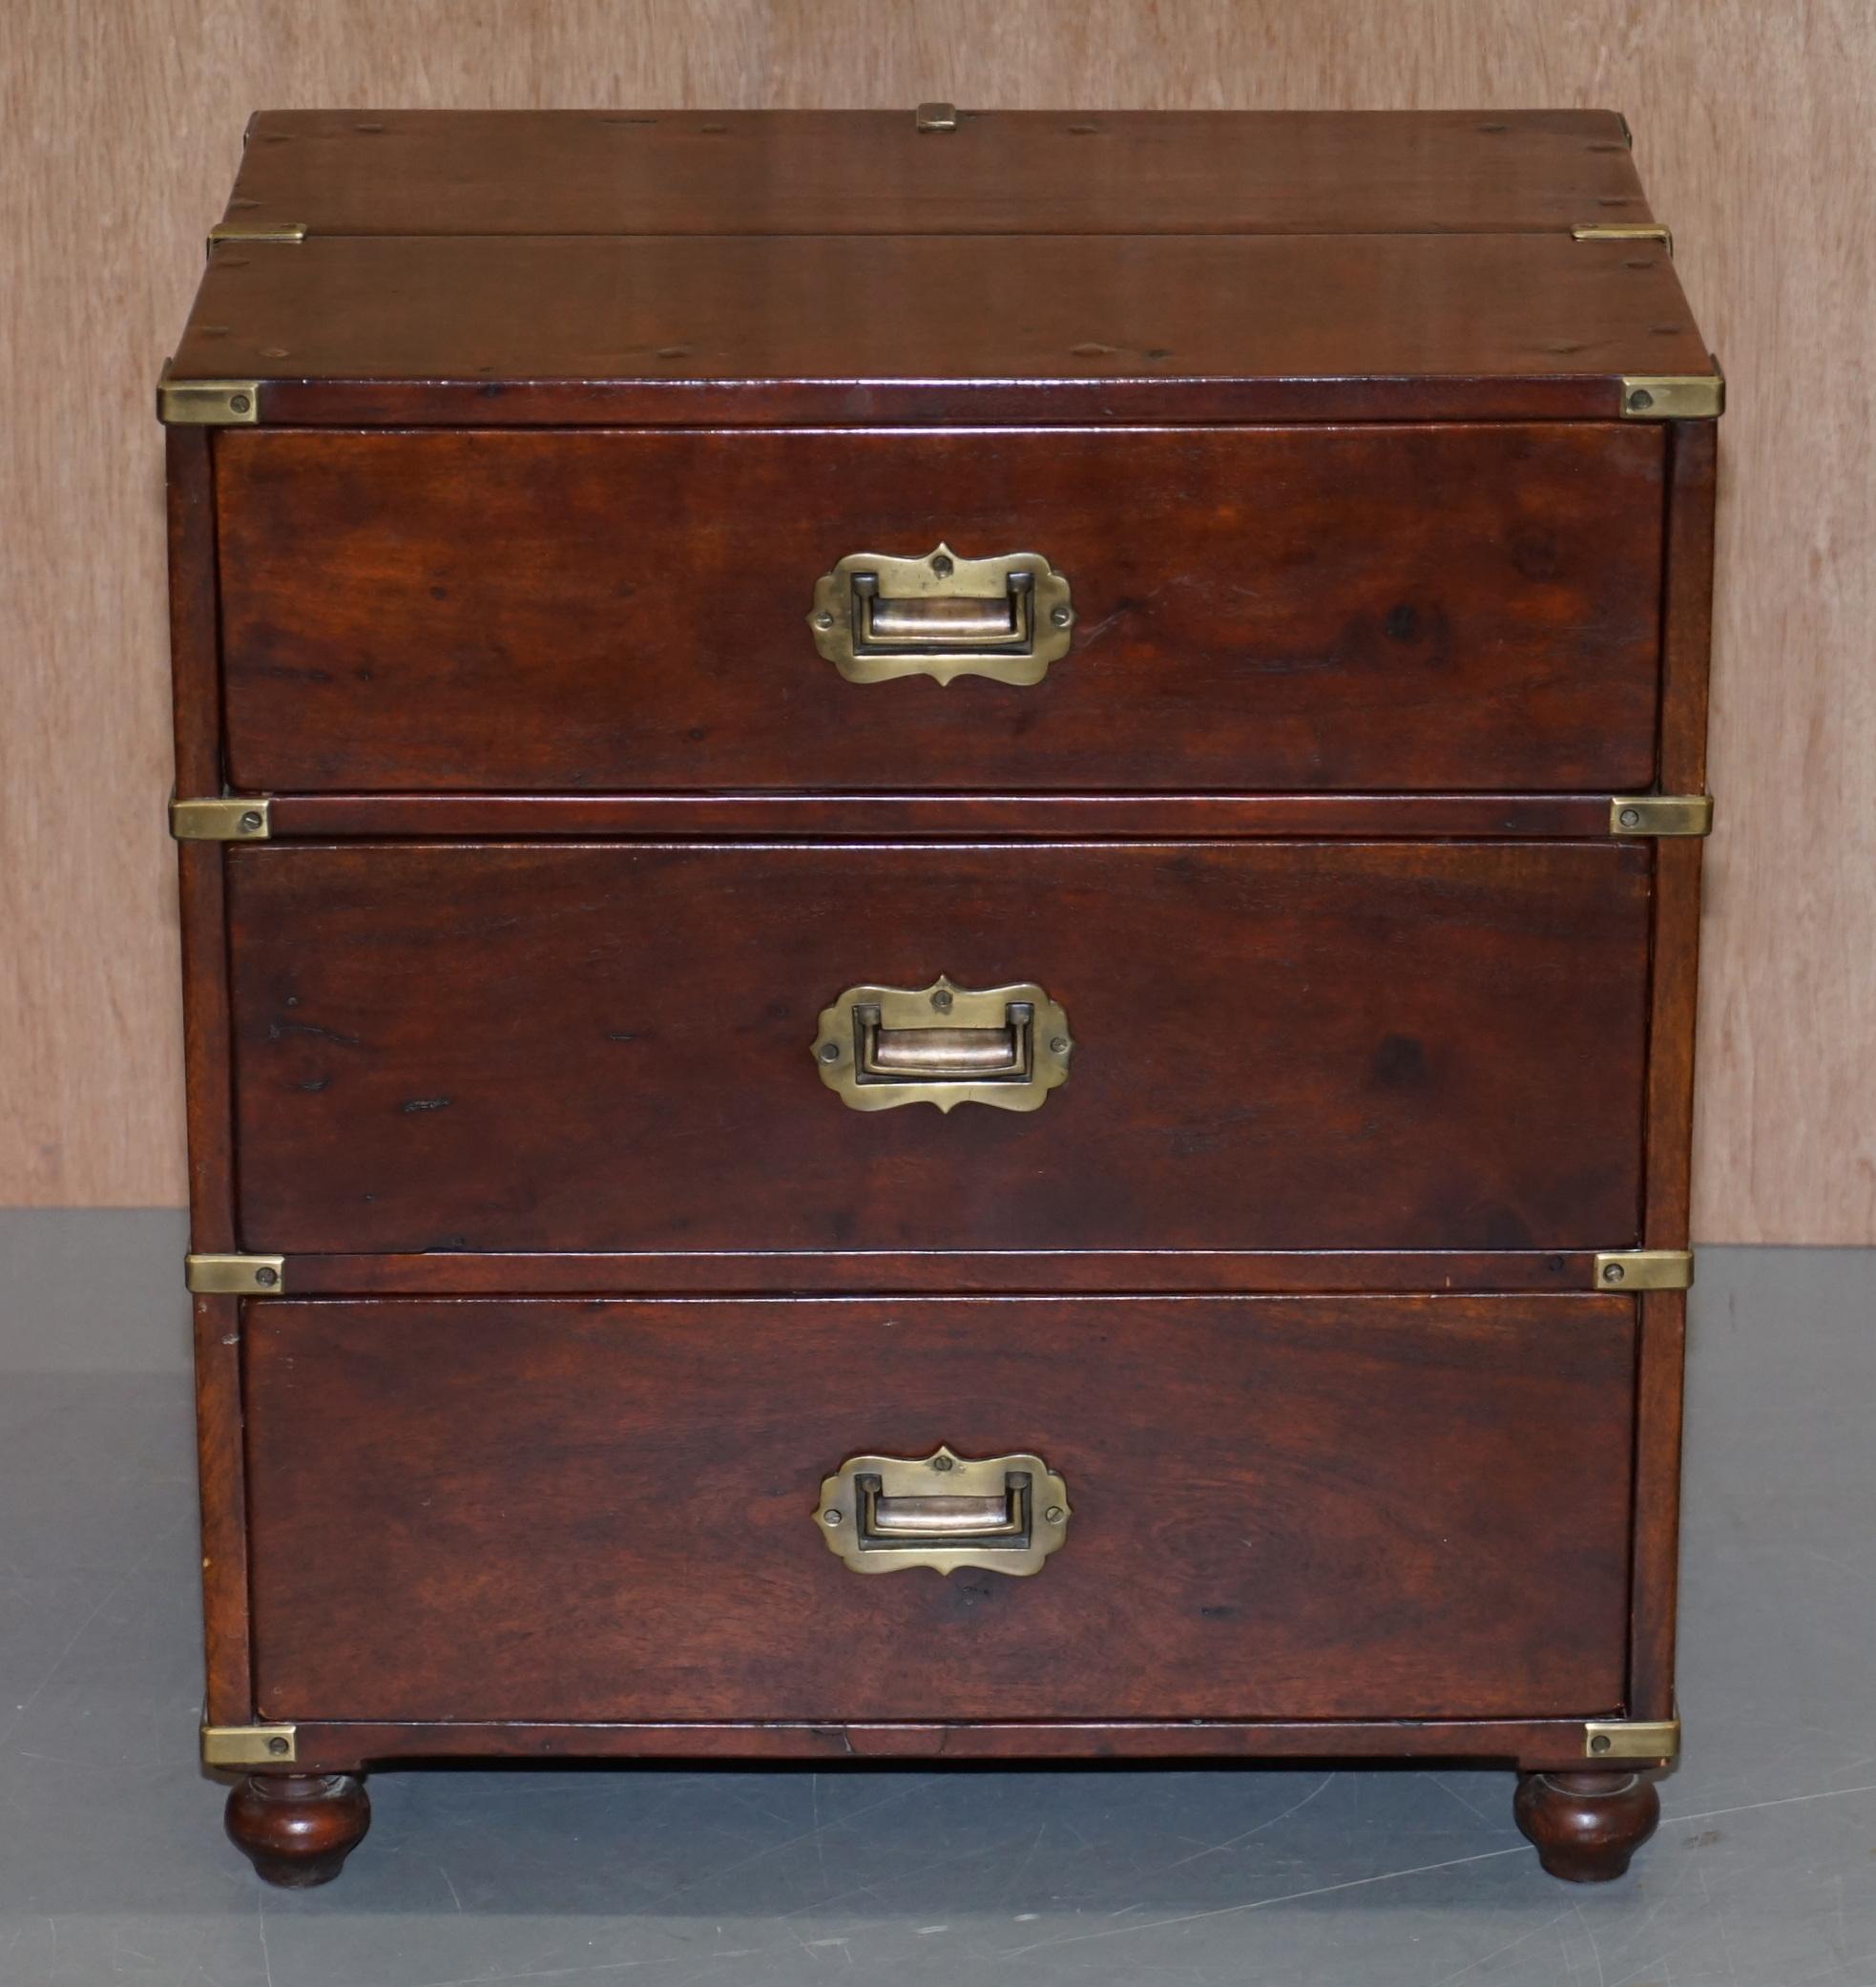 Hand-Crafted Stunning Pair of Vintage Anglo Indian Campaign Bedside Table Chests of Drawers